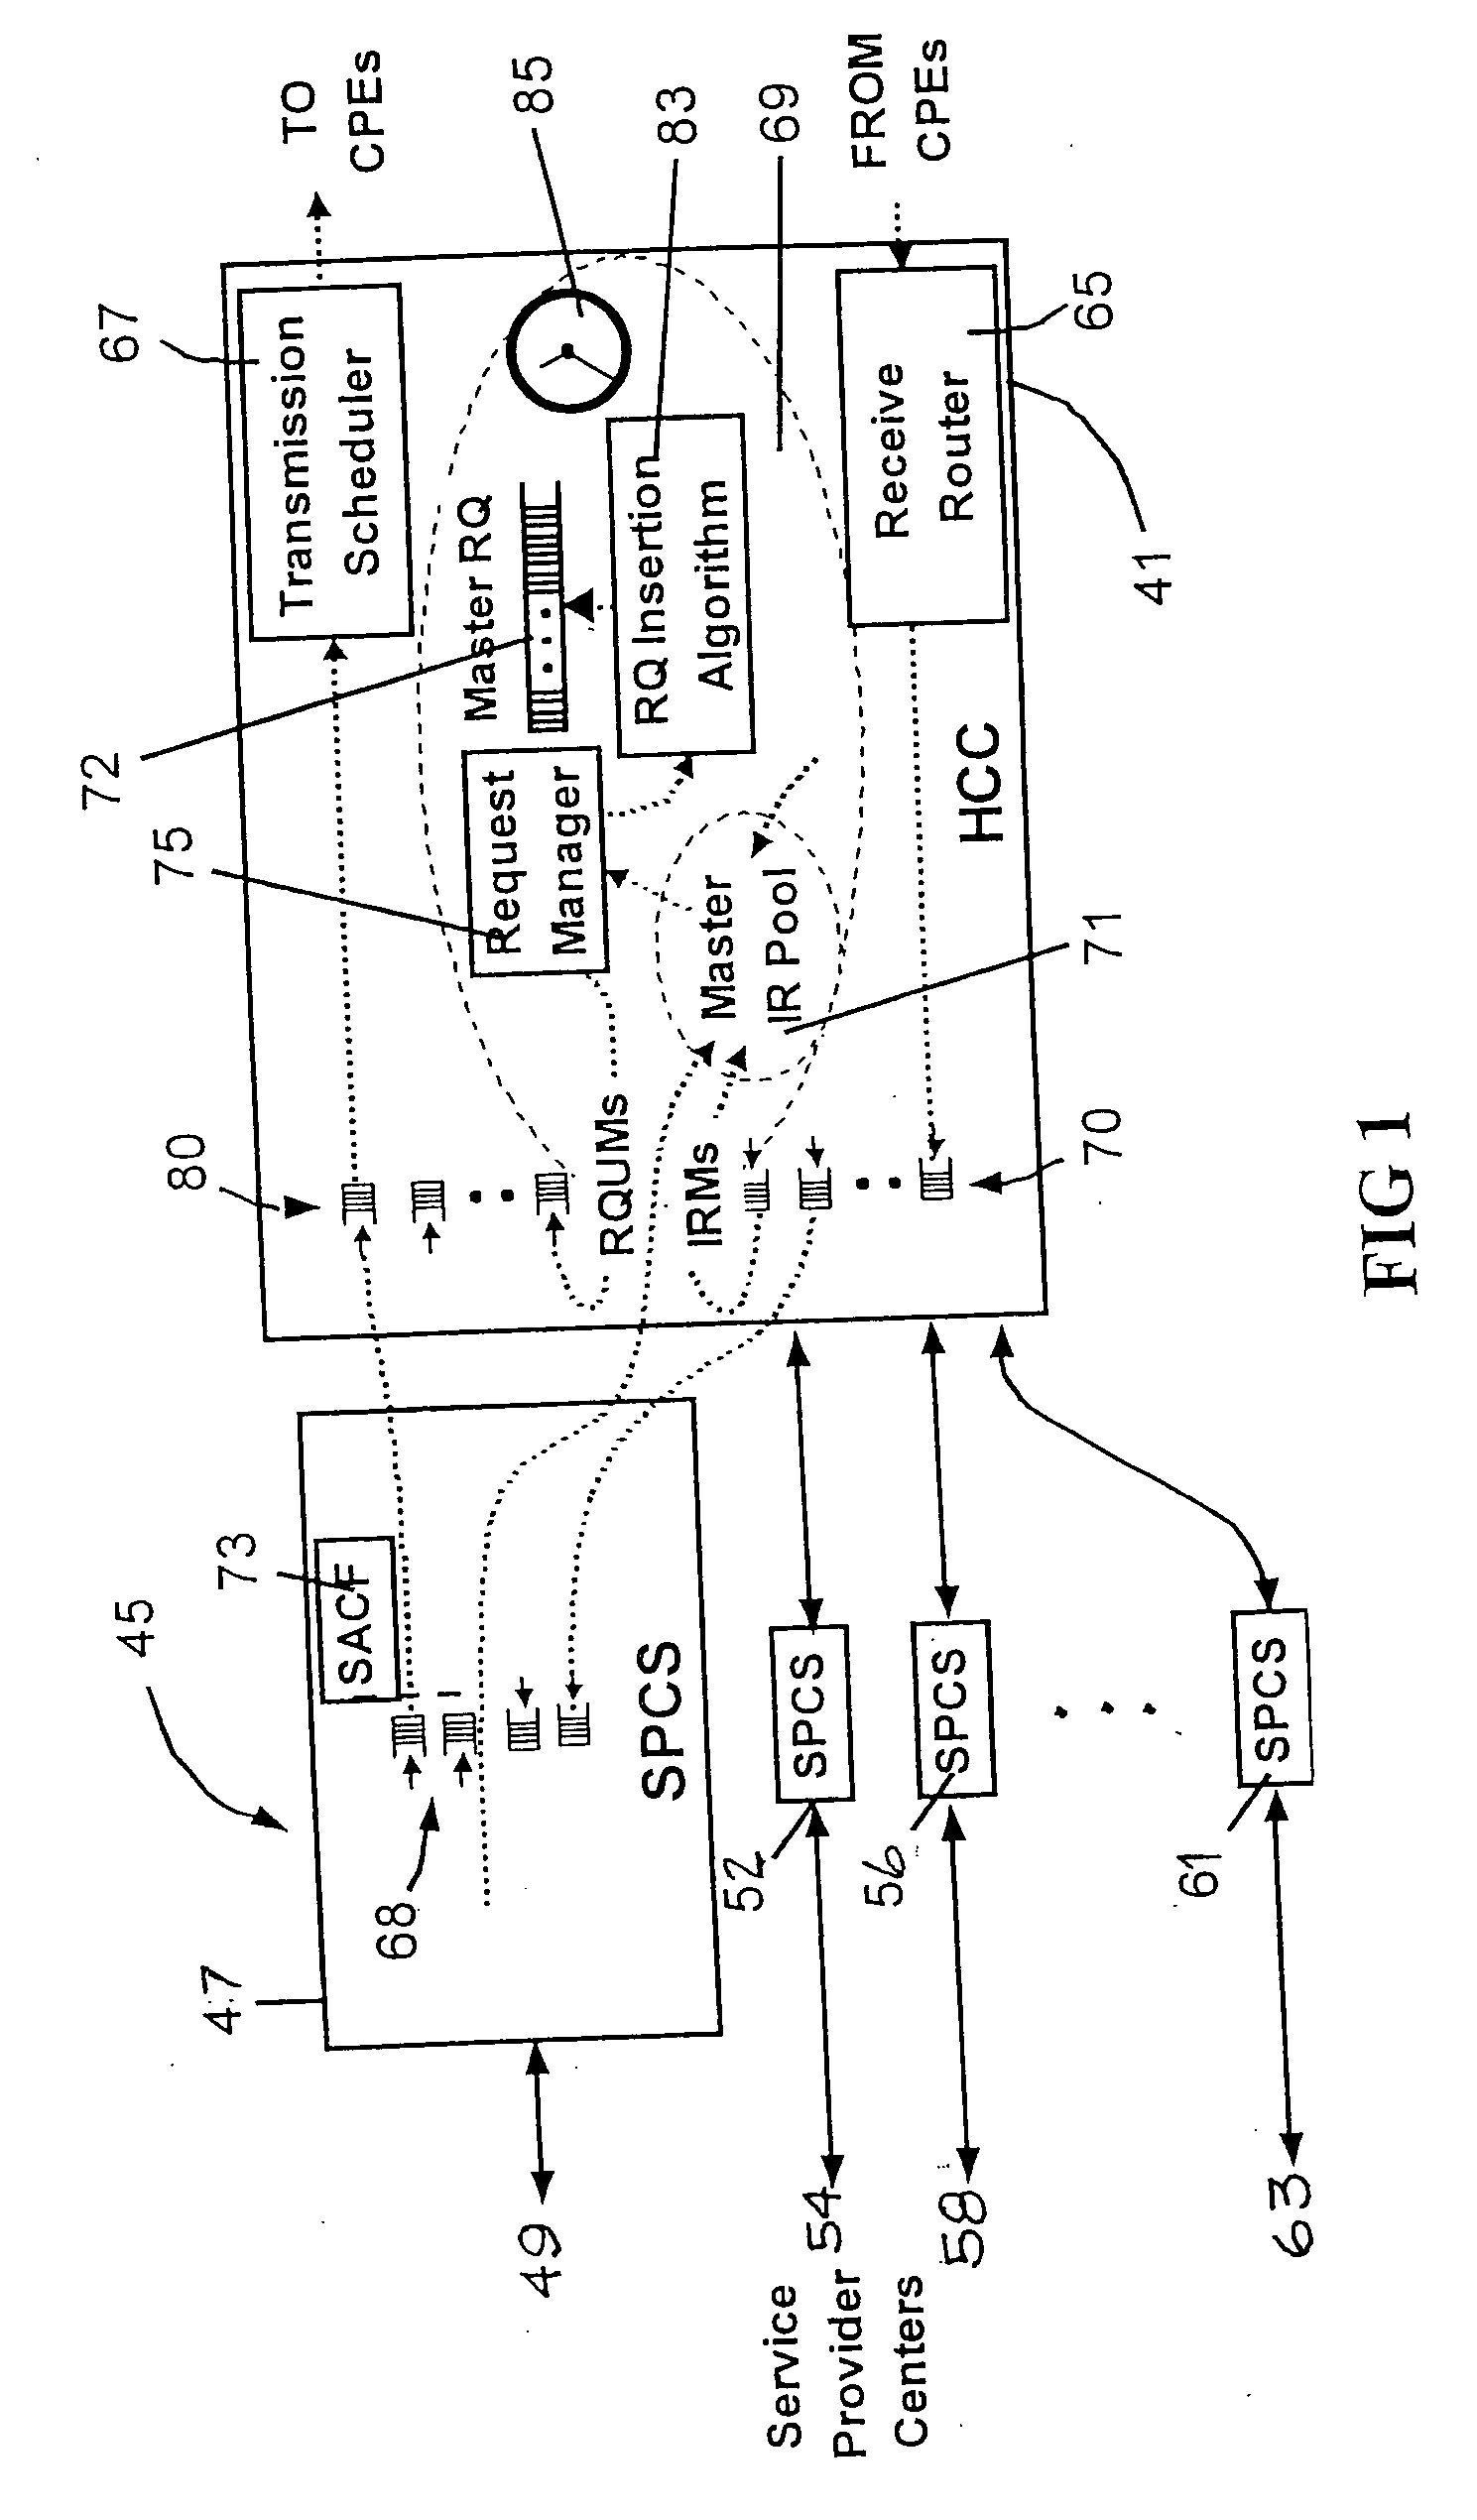 System and method for scalable multifunctional network communication